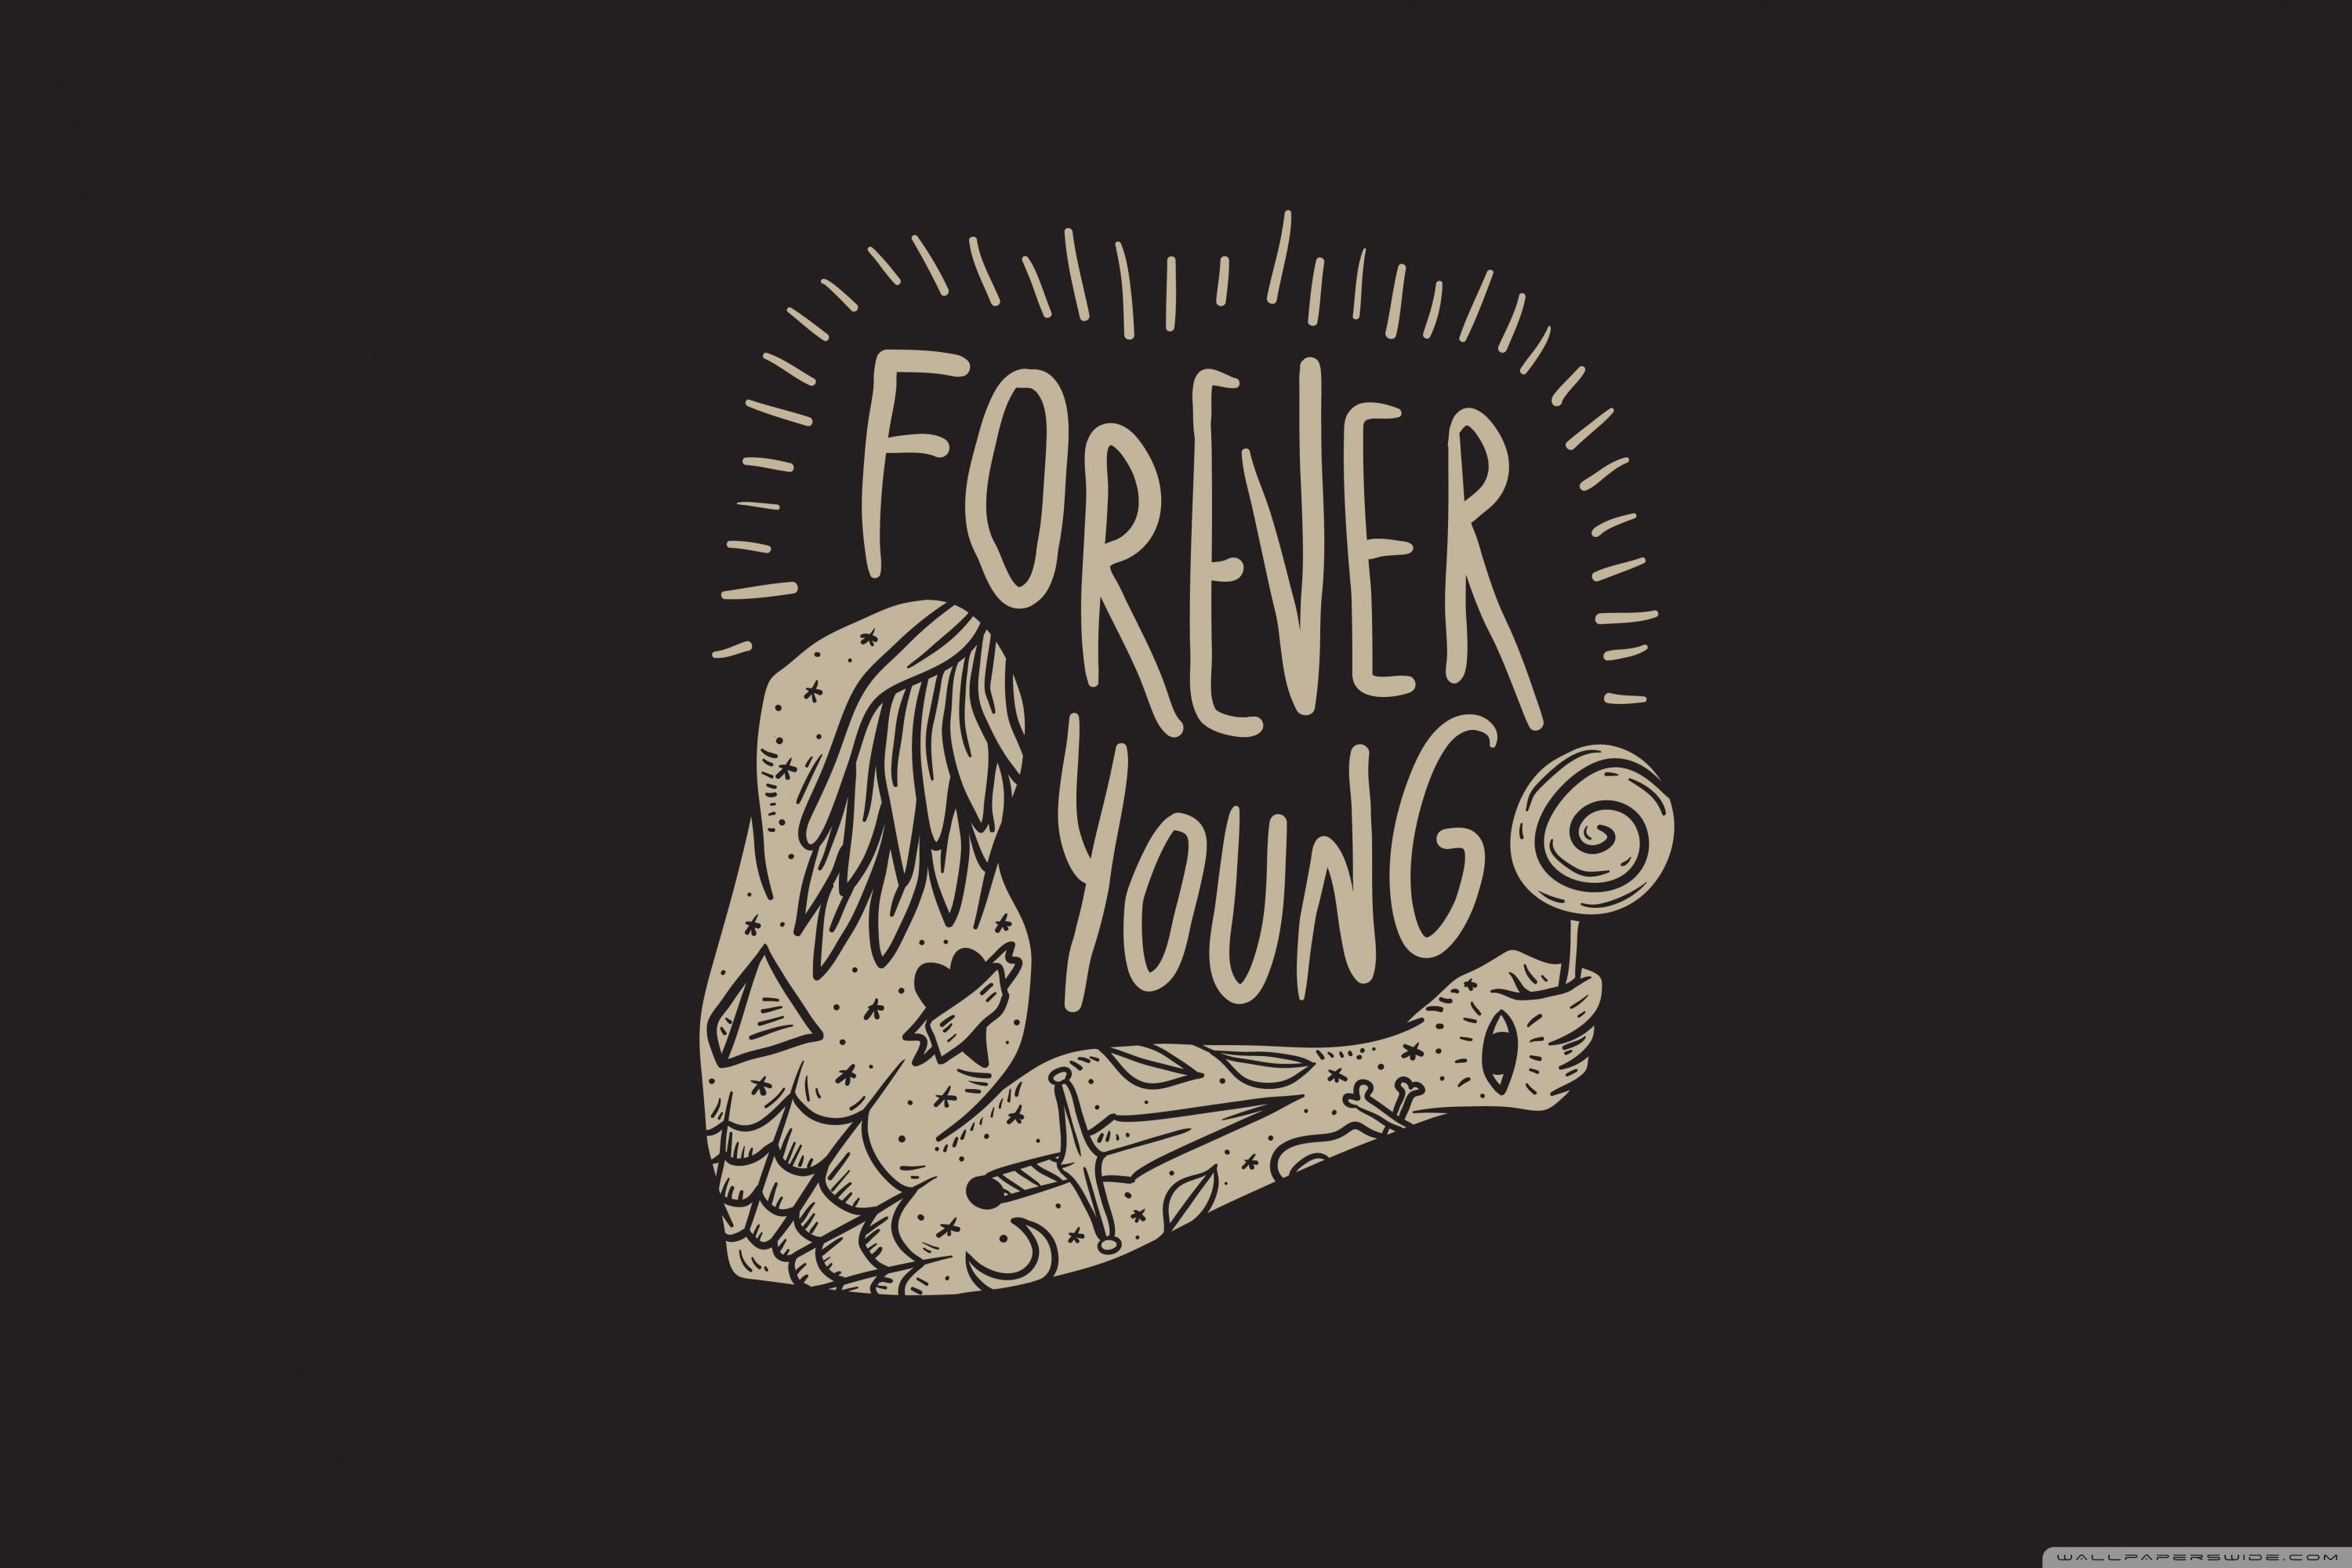 Forever Young Ultra HD Desktop Background Wallpaper for: Widescreen & UltraWide Desktop & Laptop, Multi Display, Dual Monitor, Tablet